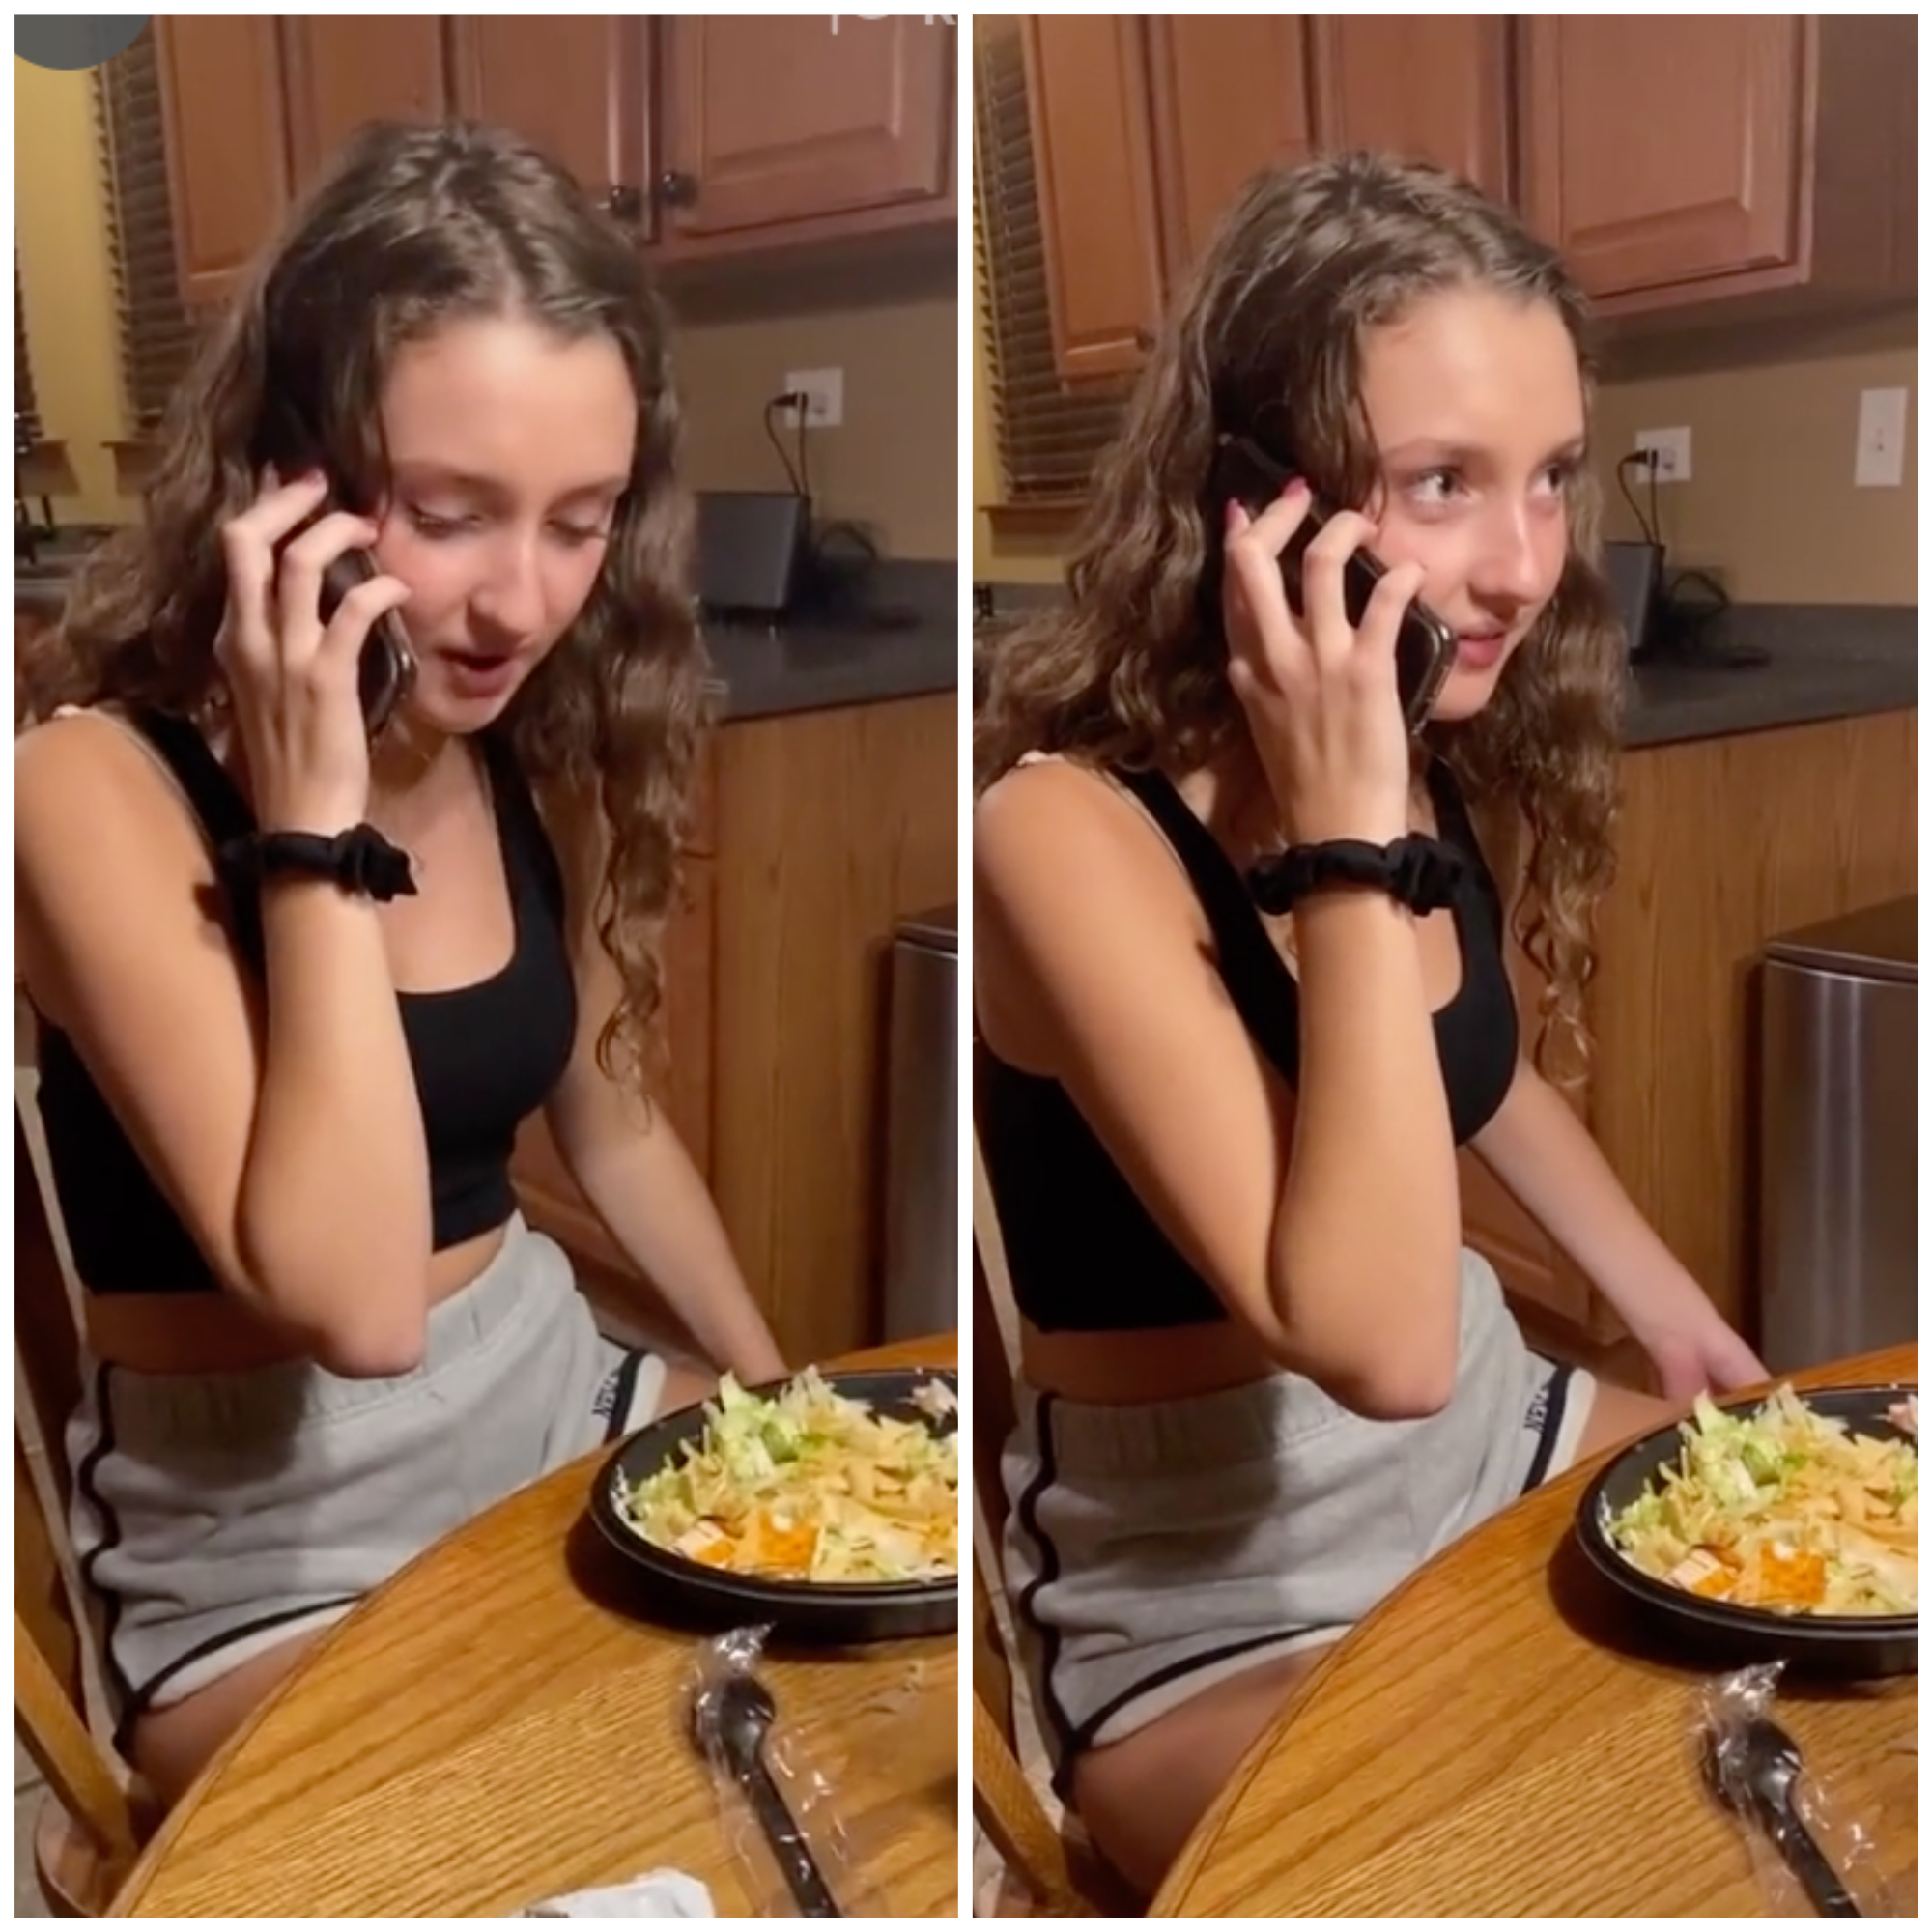 Teen Leaves Sister Horrified After Humiliating Taco Bell Prank You 